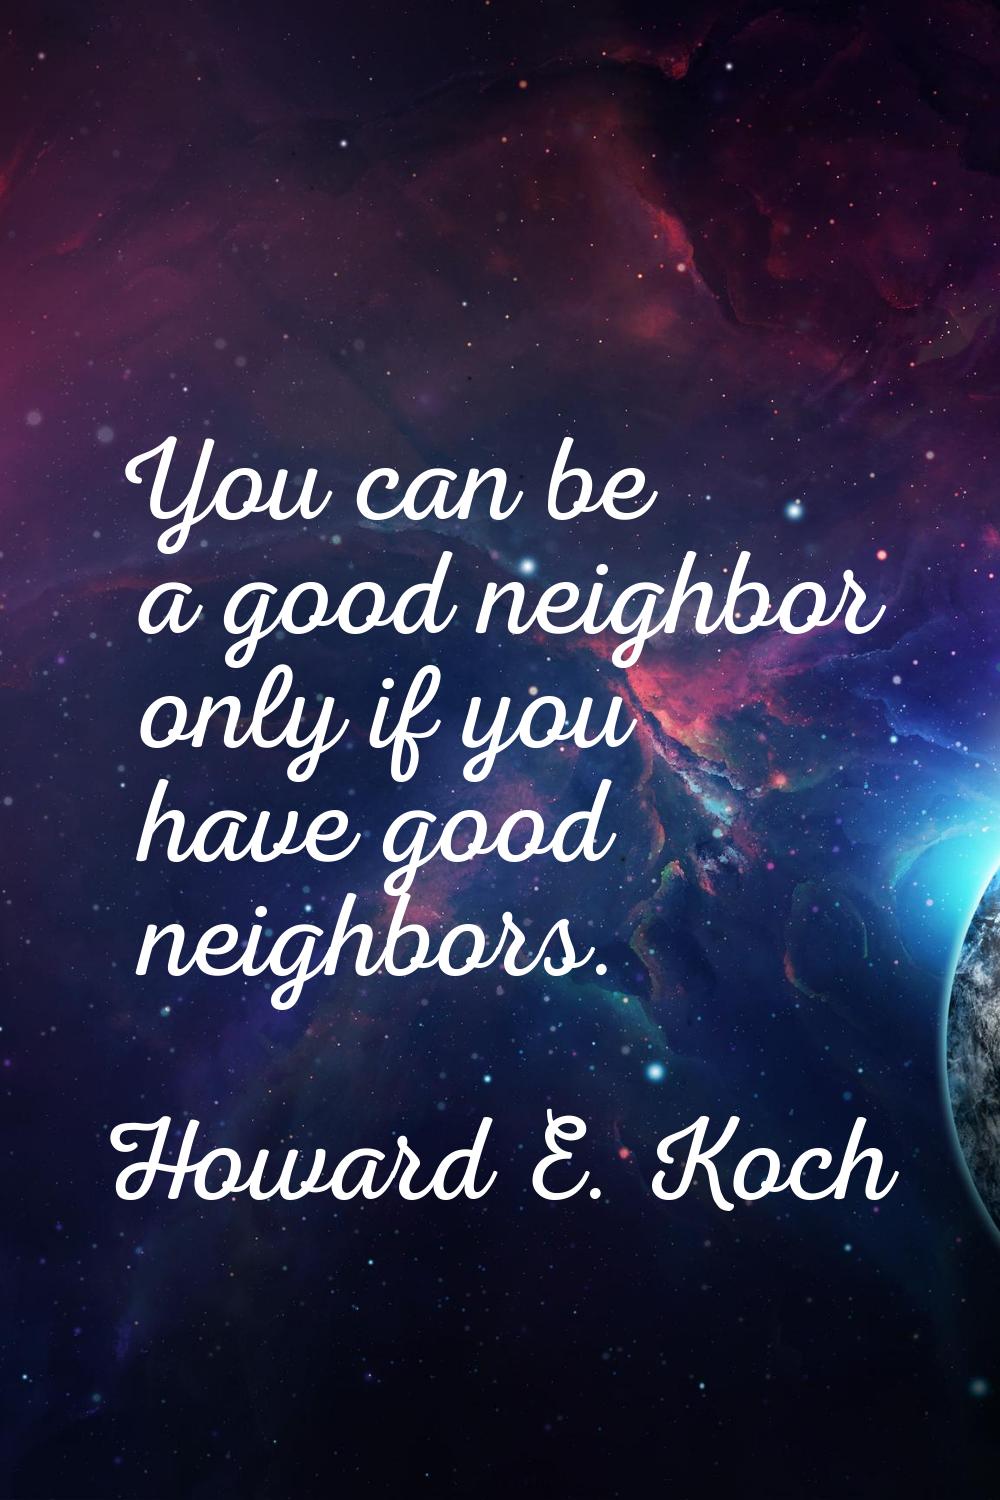 You can be a good neighbor only if you have good neighbors.